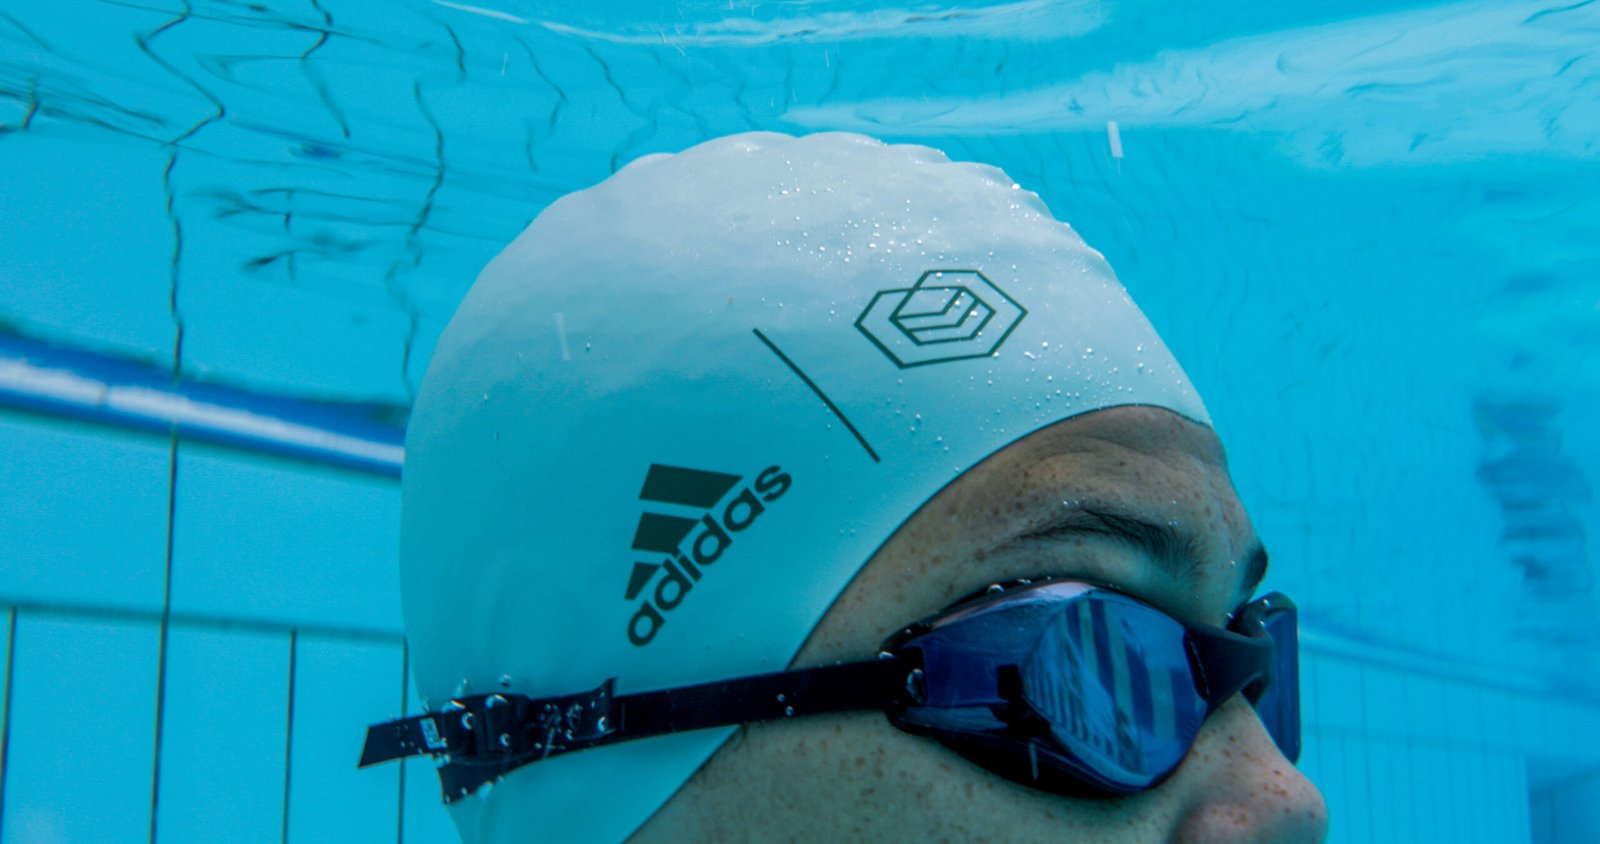 SWIM FOR ALL - ADIDAS AND SOUL CAP ANNOUNCE PARTNERSHIP TO MAKE SWIMMING MORE ACCESSIBLE